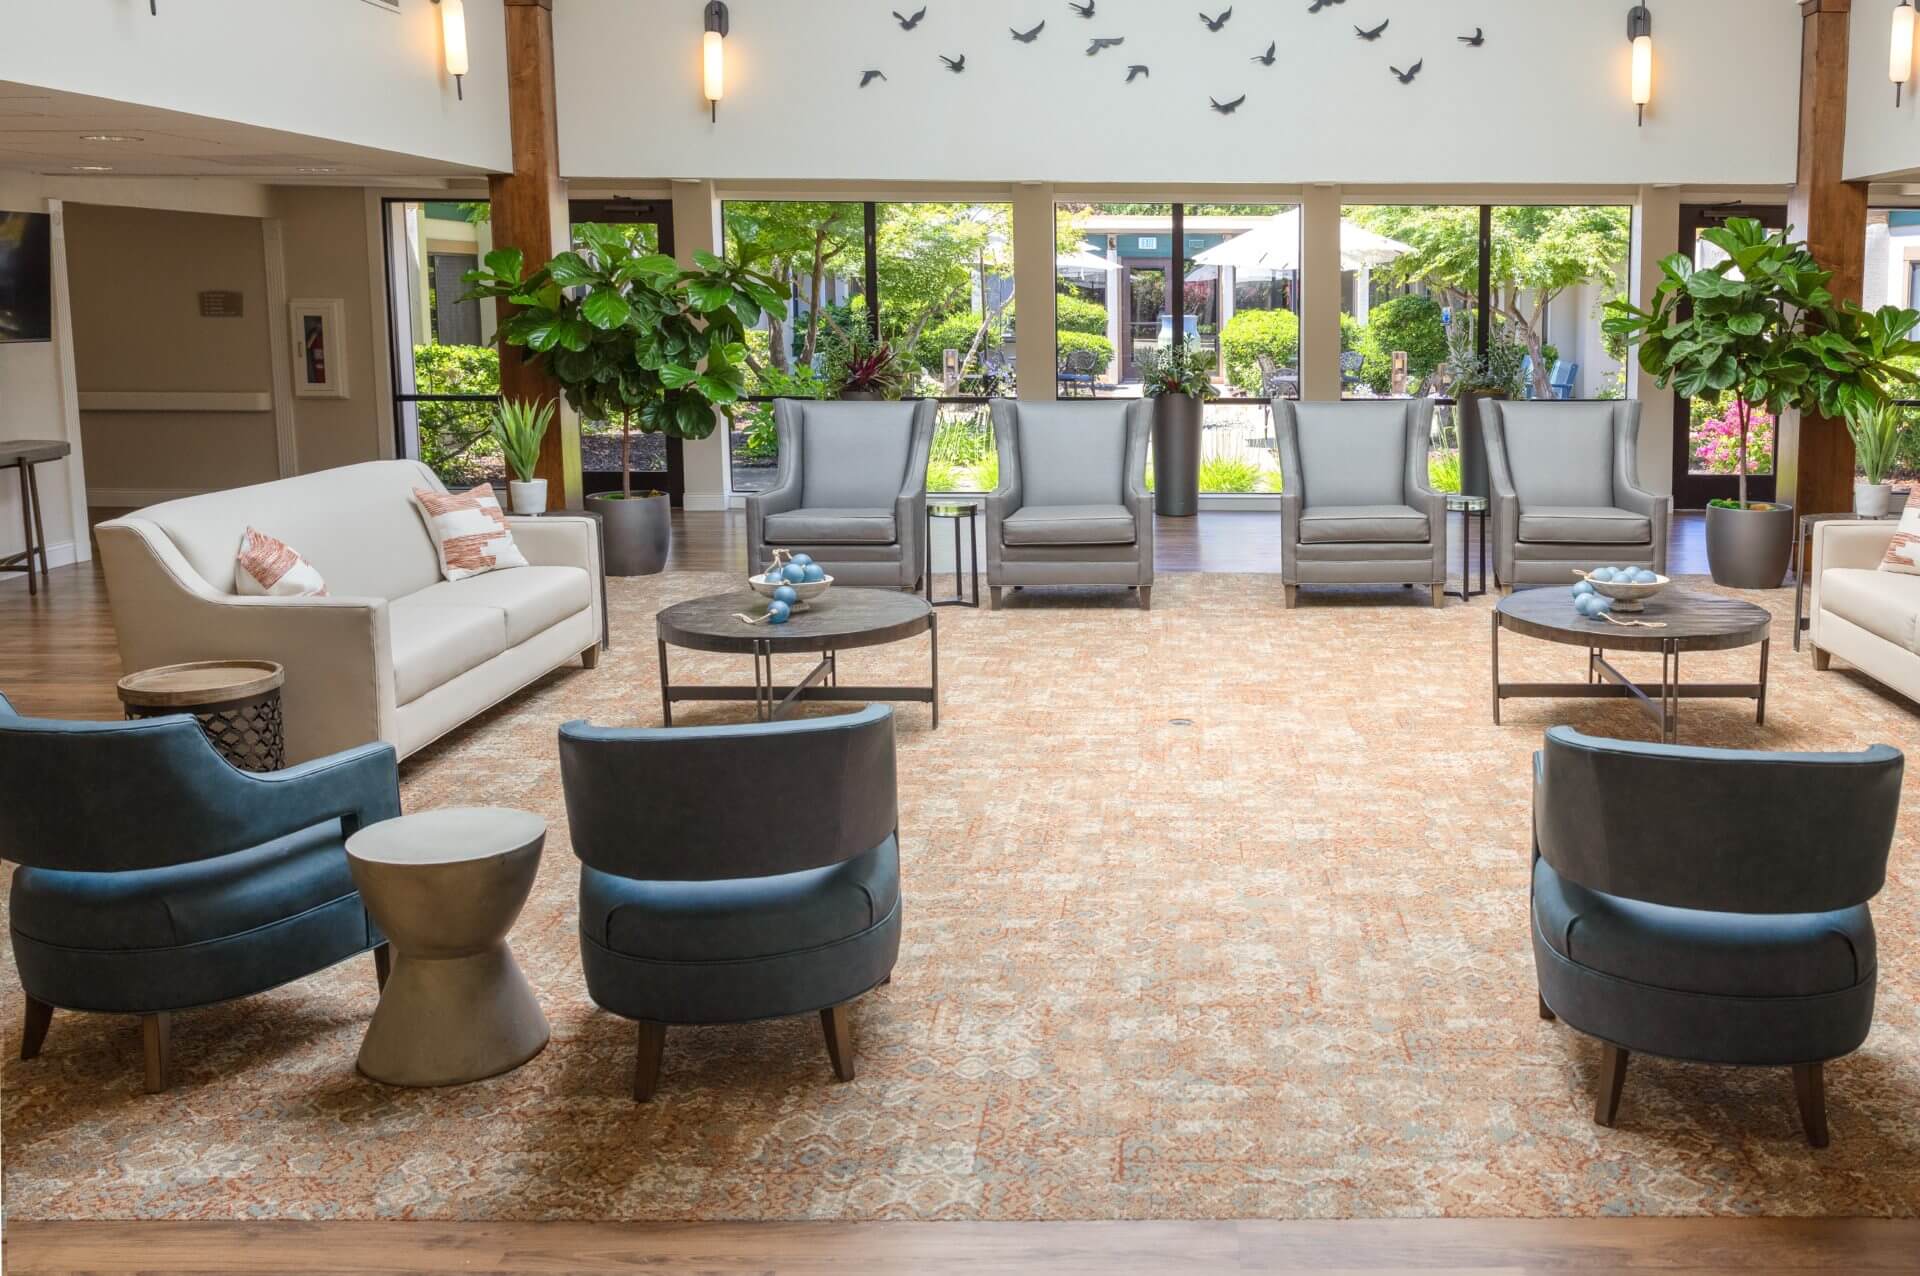 Designed with seniors in mind, Carlton Senior Living Orangevale offers independent living apartments and more